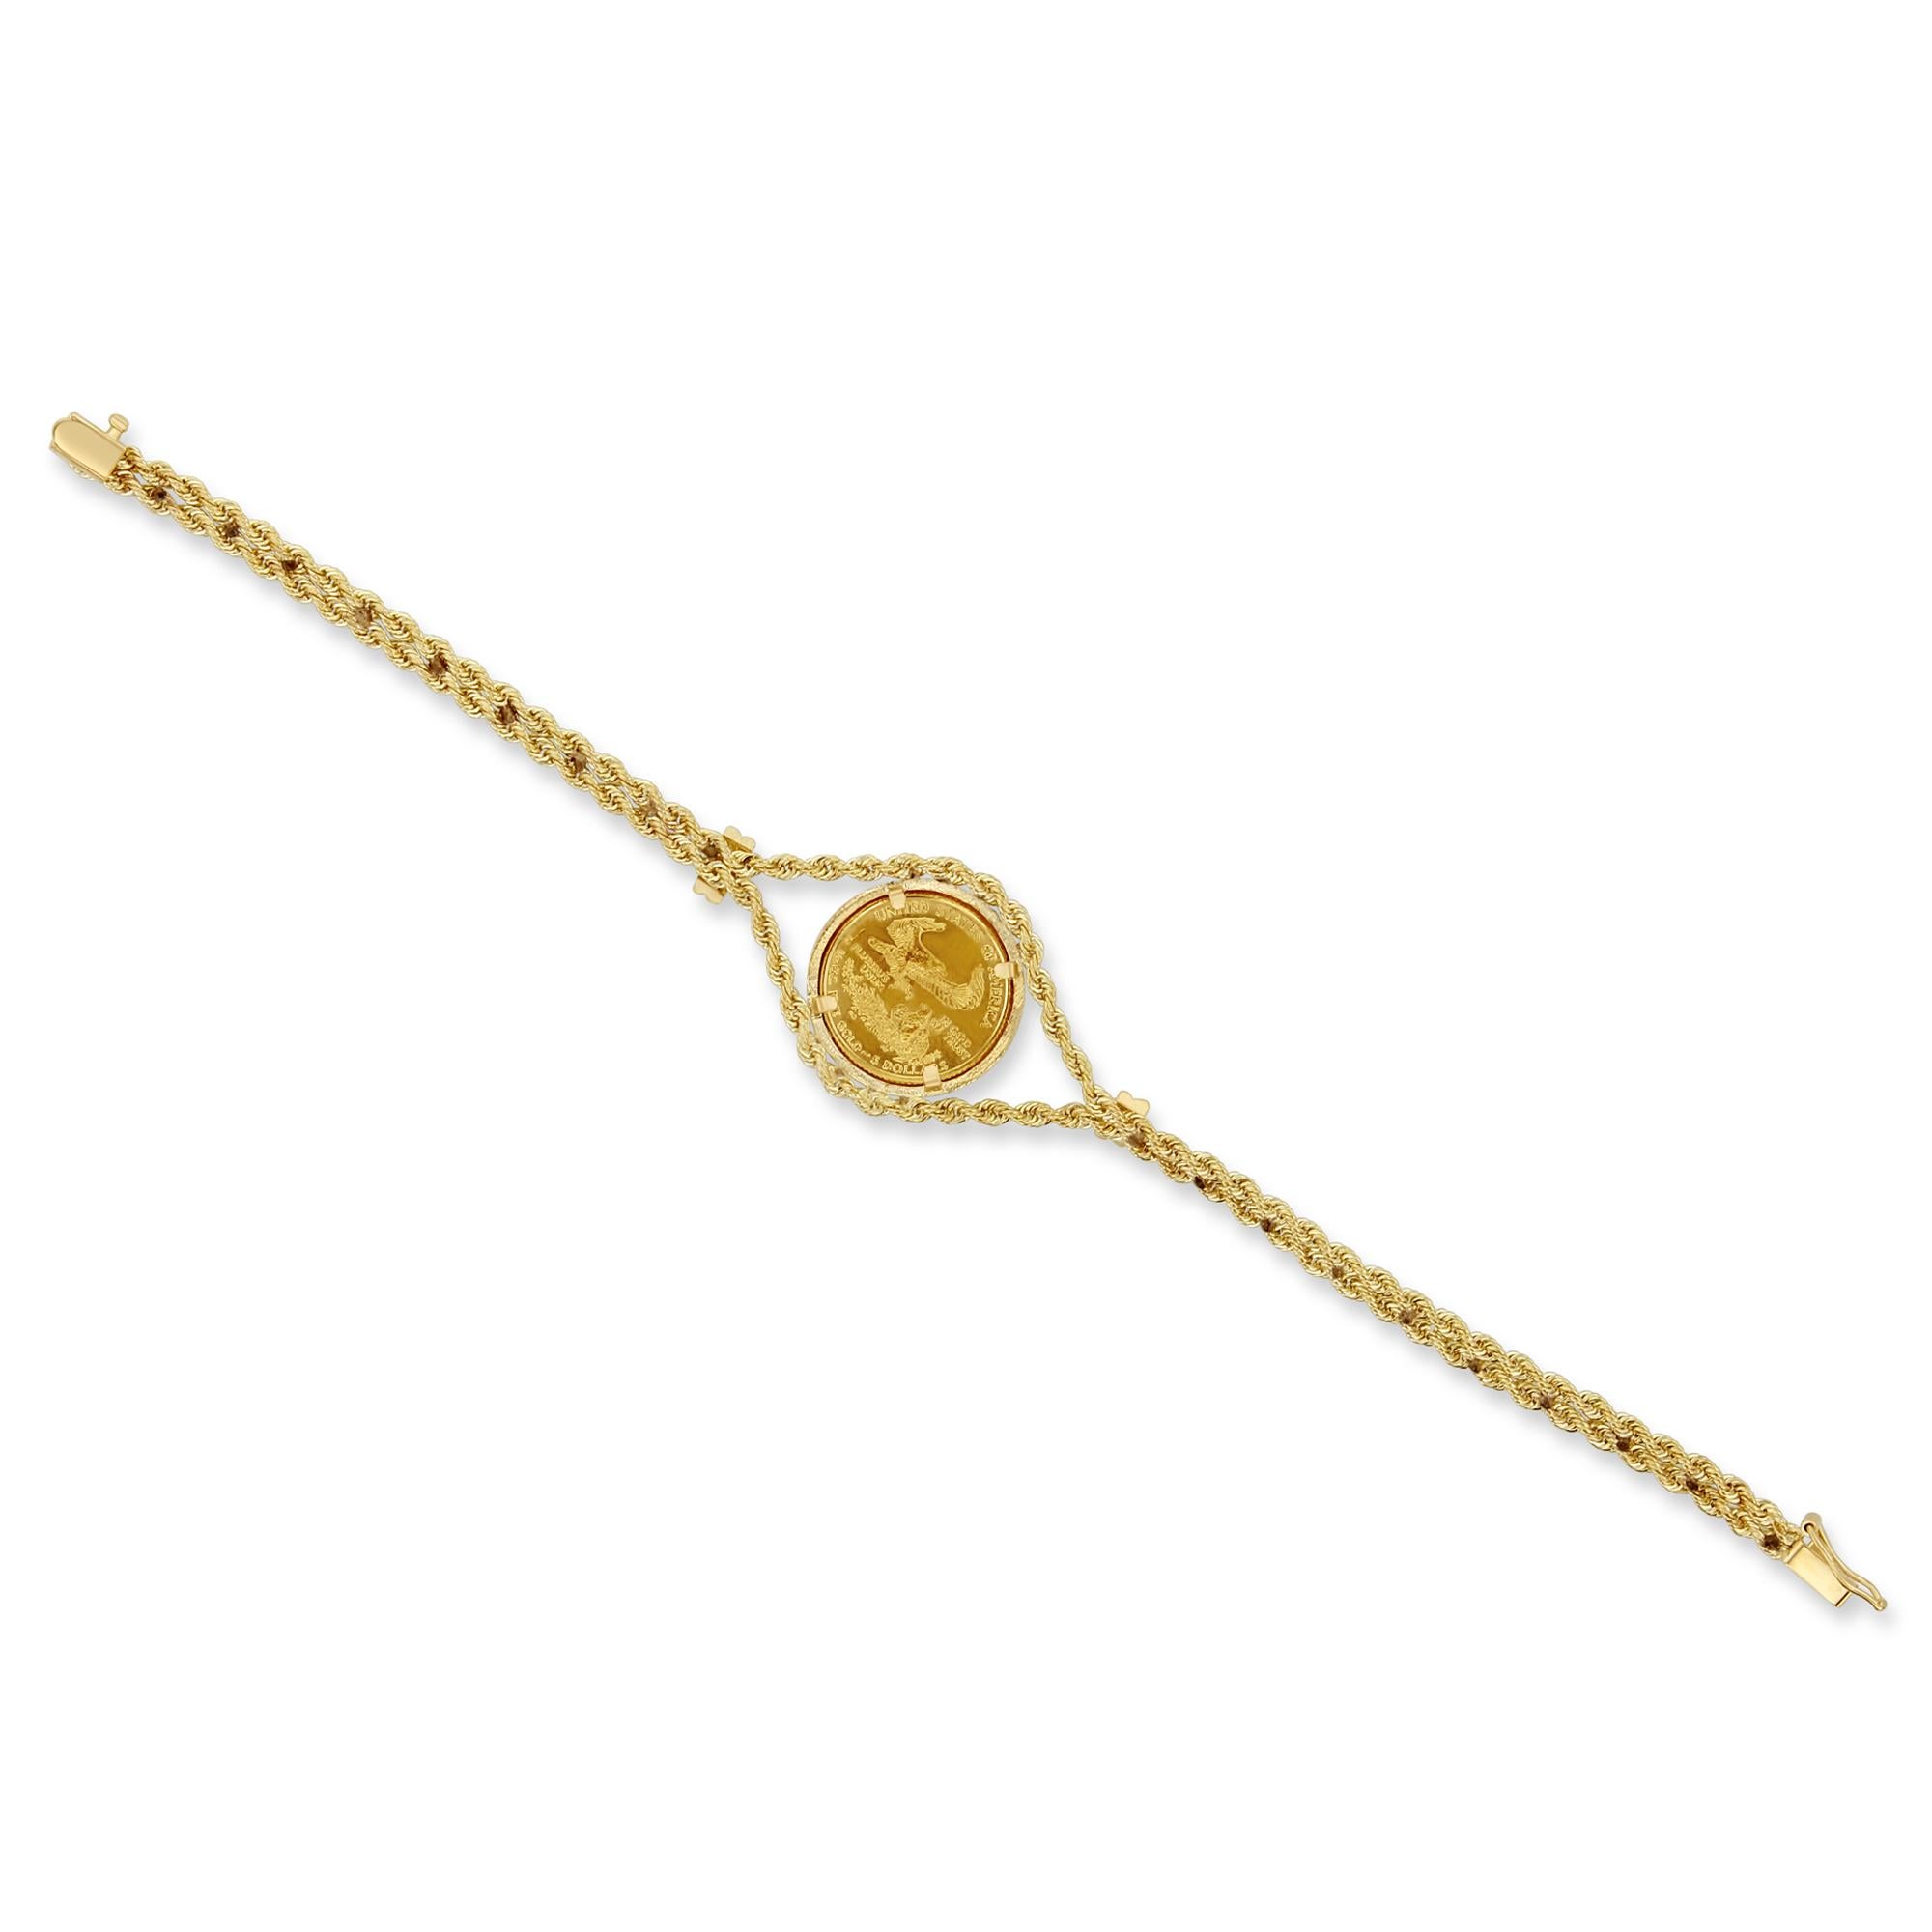 Lady Liberty American Eagle 1/10OZ Coin Bracelet with a solid 14k Yellow Gold Fluted Bezel on a Rope Chain

Experience the spirit of freedom and national pride with our enchanting Lady Liberty American Eagle Coin Bracelet. Crafted in 14k Yellow